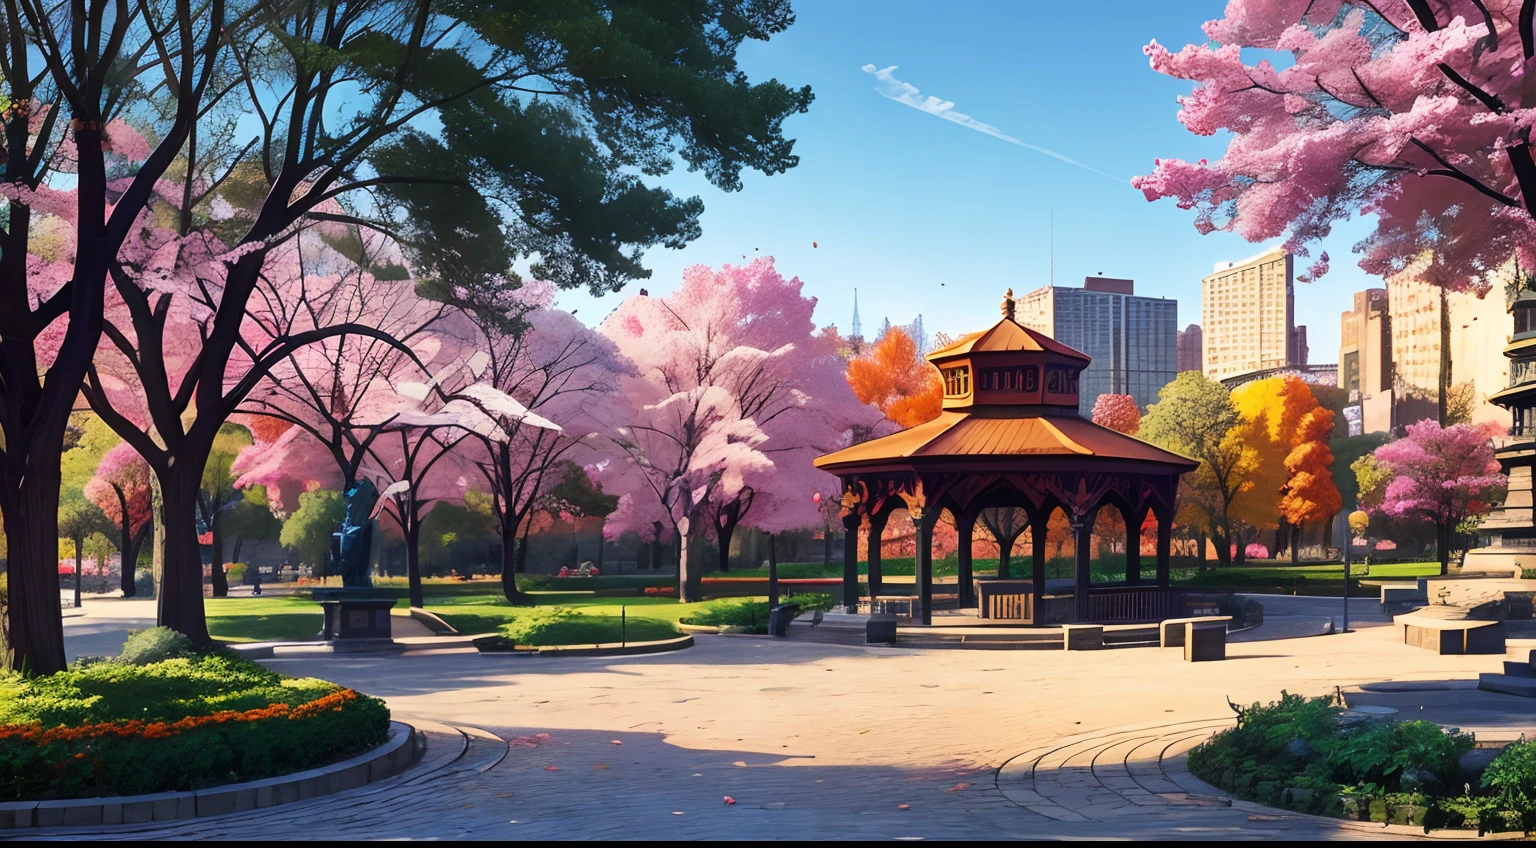 (best quality:1.0), a vibrant park in the middle of a bright cityscape, trees, benches, 1 statue, 1 gazebo, cobblestone paths, comics style, bright